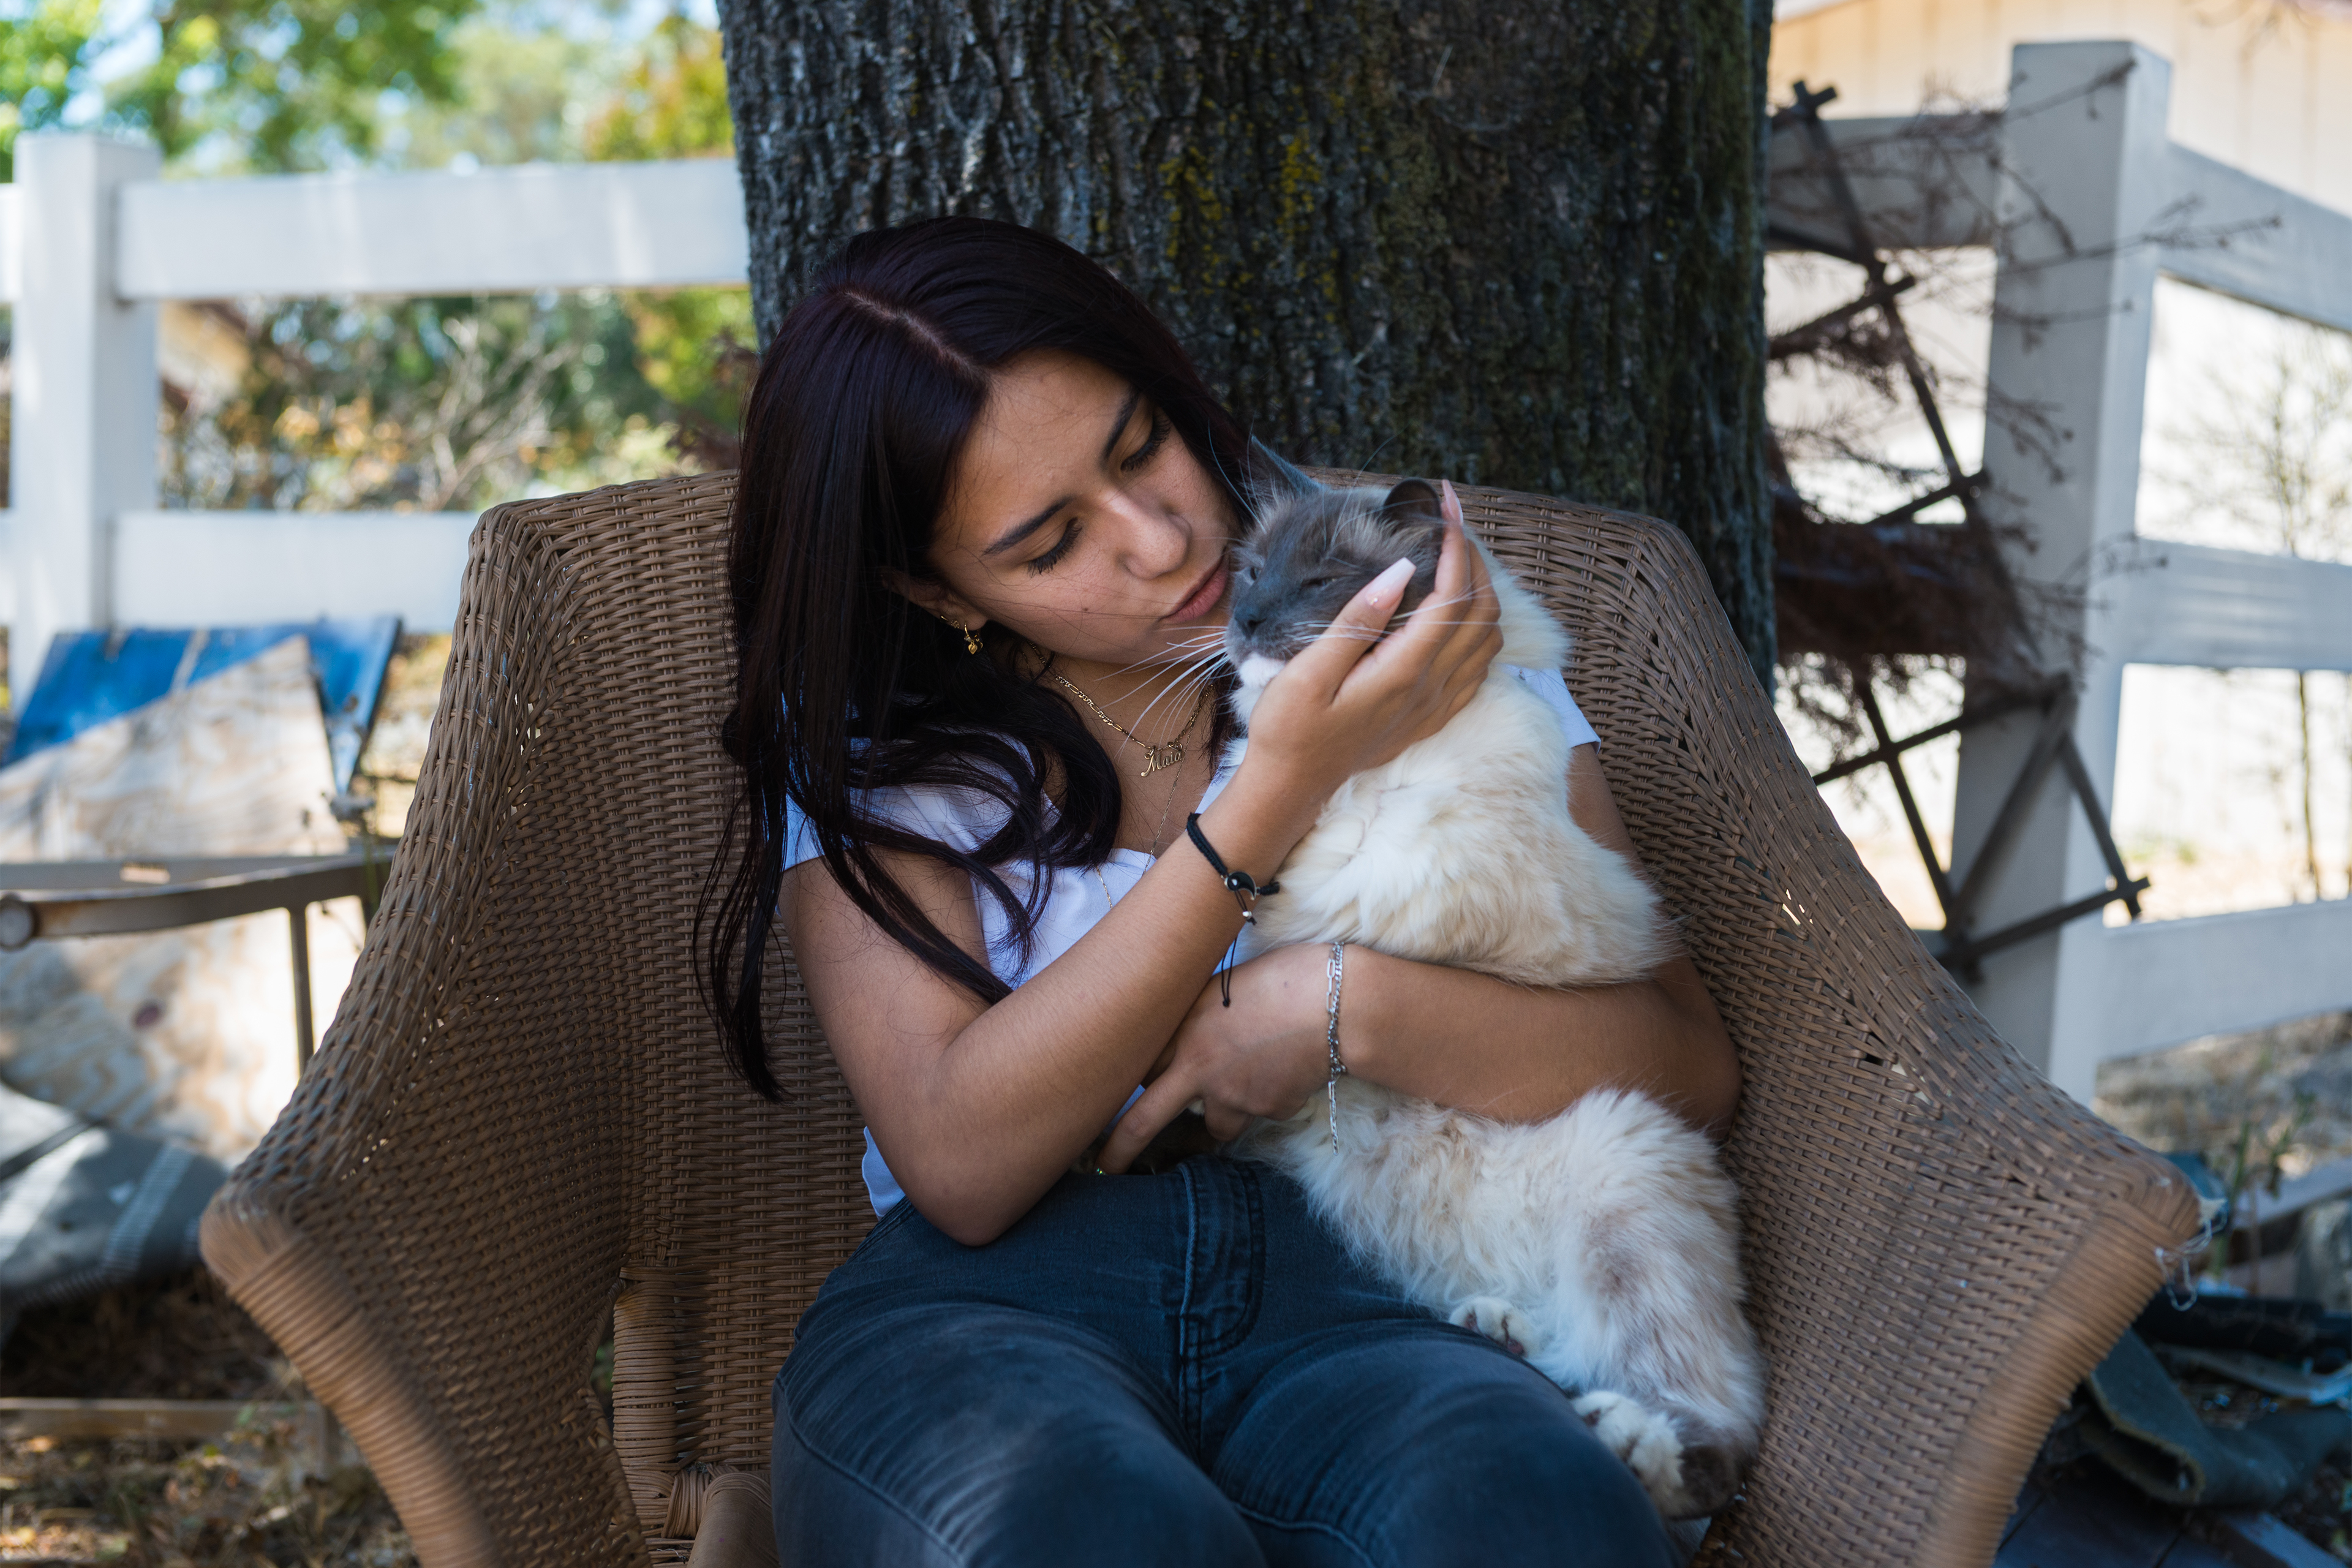 A photo shows Maia Bravo sitting in a chair outside and holding her cat, Misi.